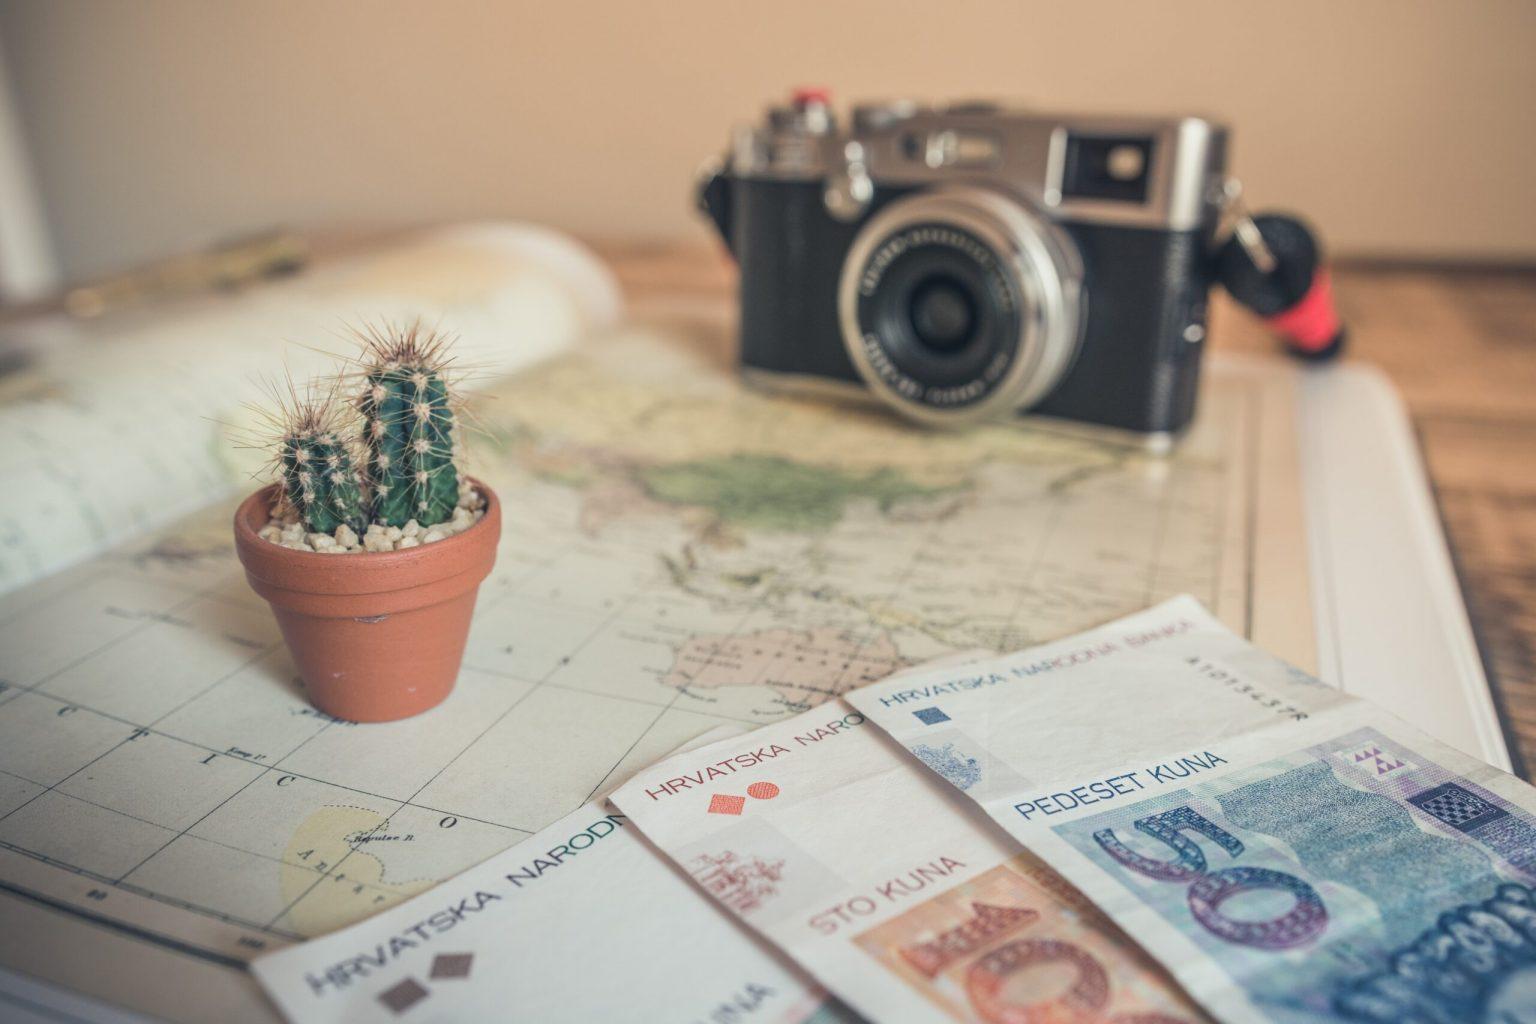 11 Ways to Make Money With Photography